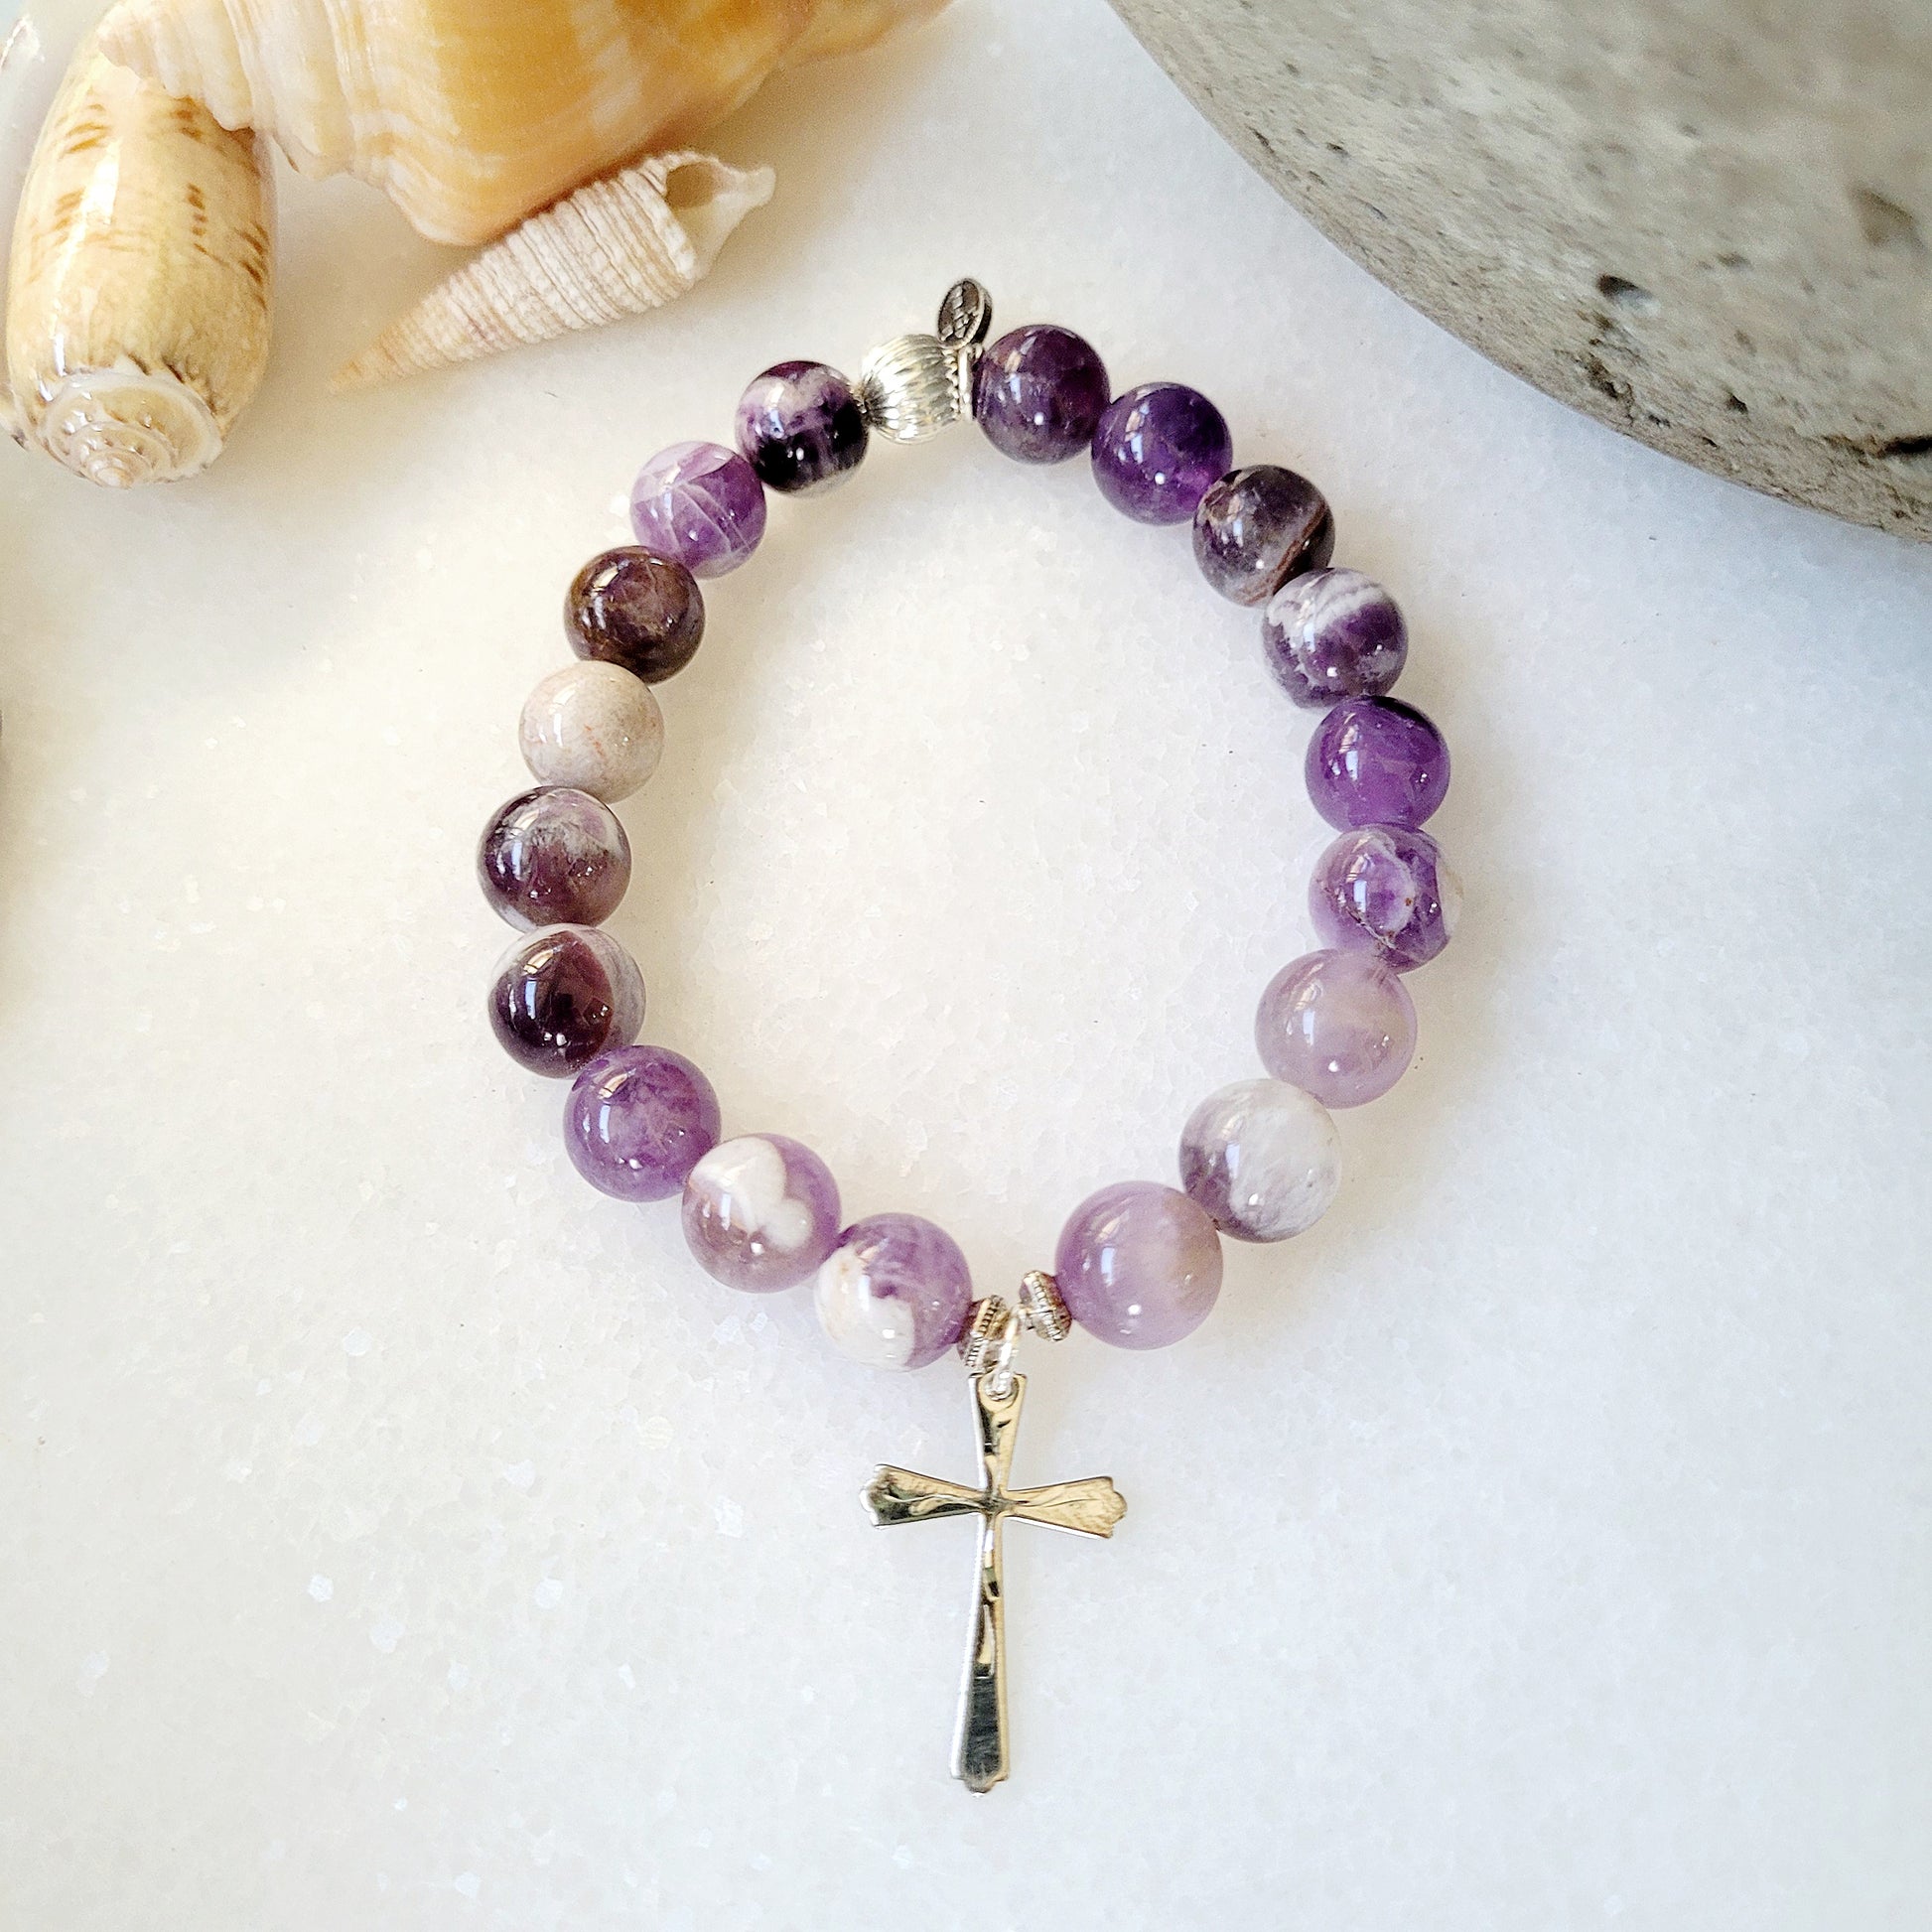 Amethyst 10mm Dogtooth Beaded Bracelet w/ Sterling Silver Cross - Afterlife Jewelry Designs